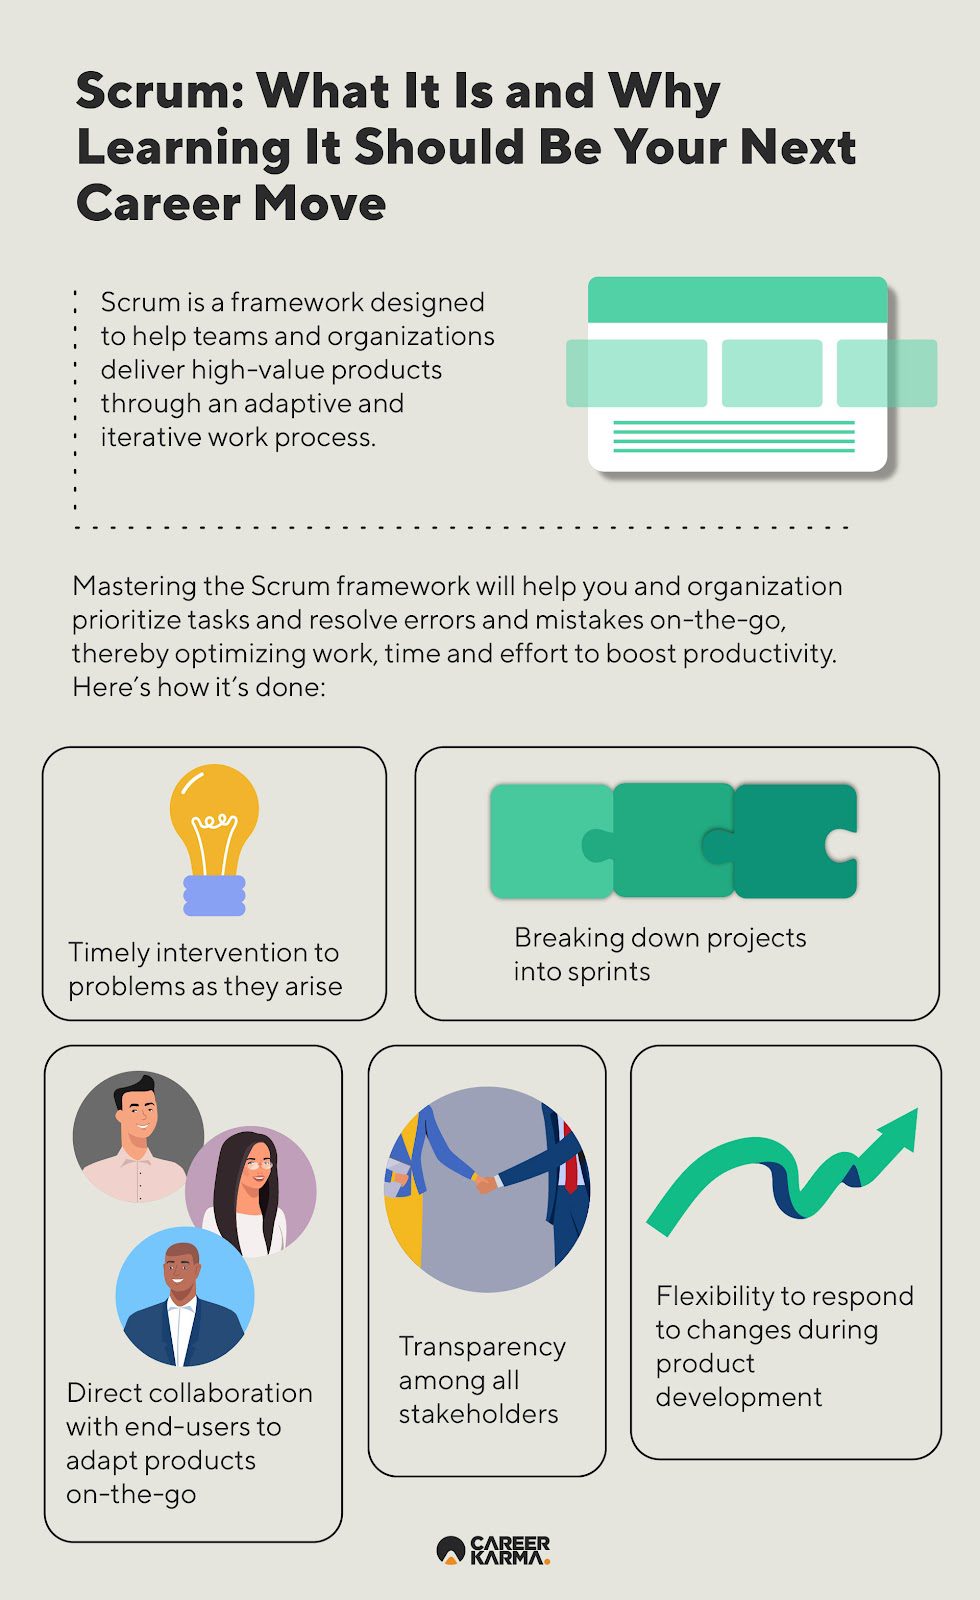 An infographic explaining what Scrum is and why learning it is a good career move